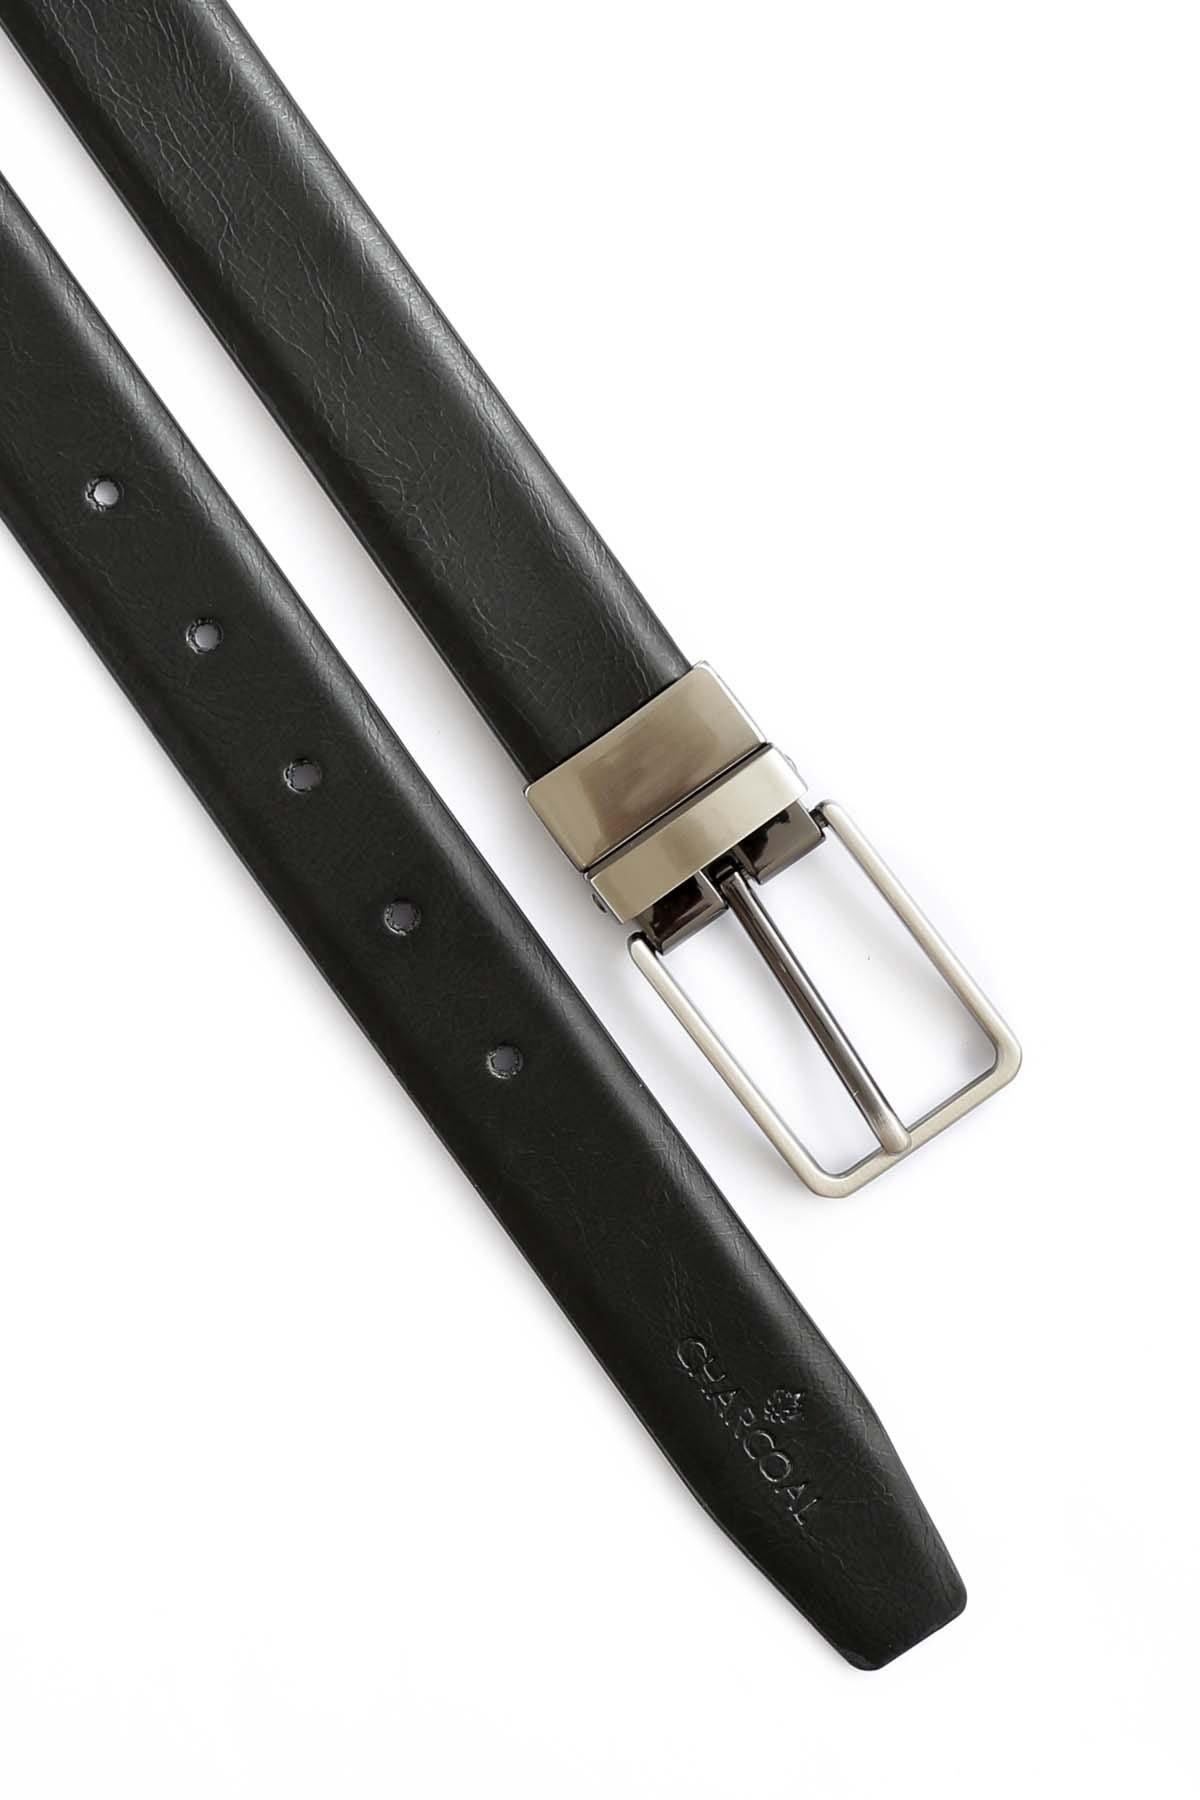 Reversible Belt at Charcoal Clothing